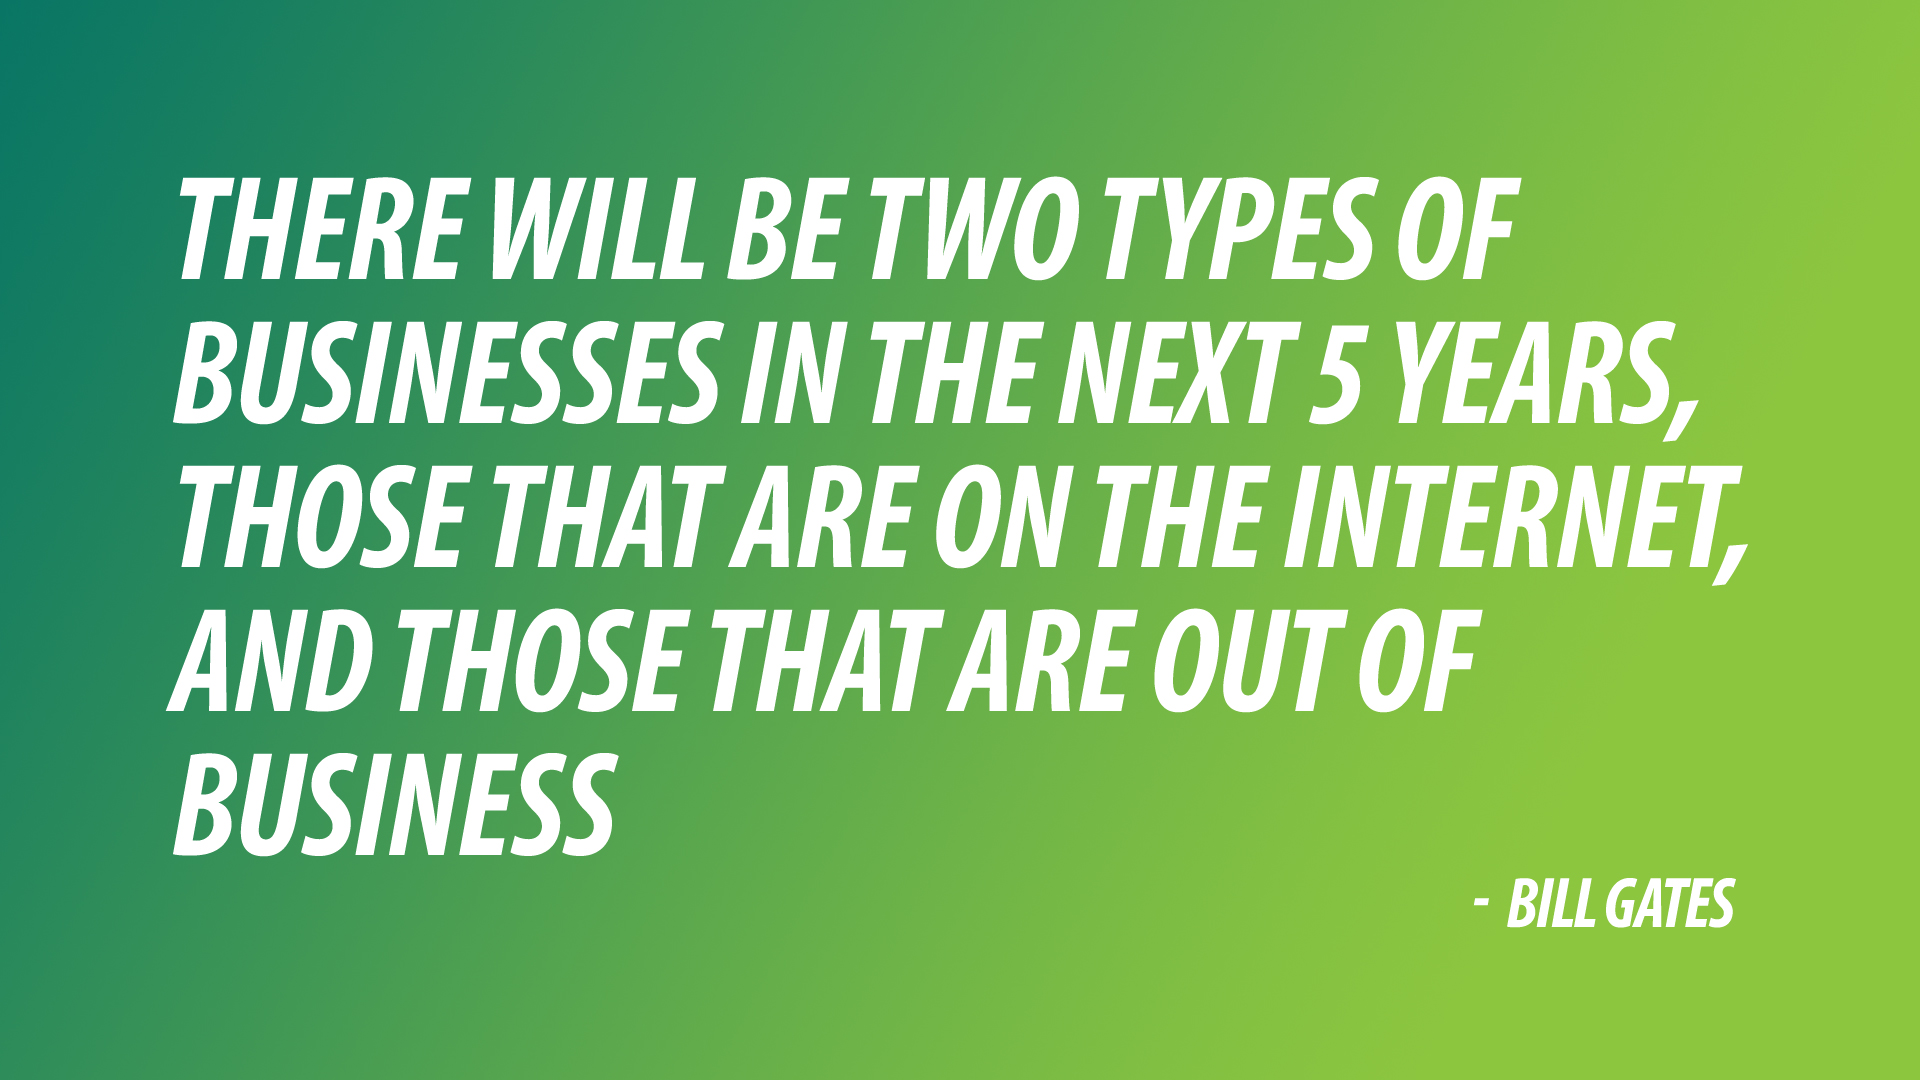 Gates business quote